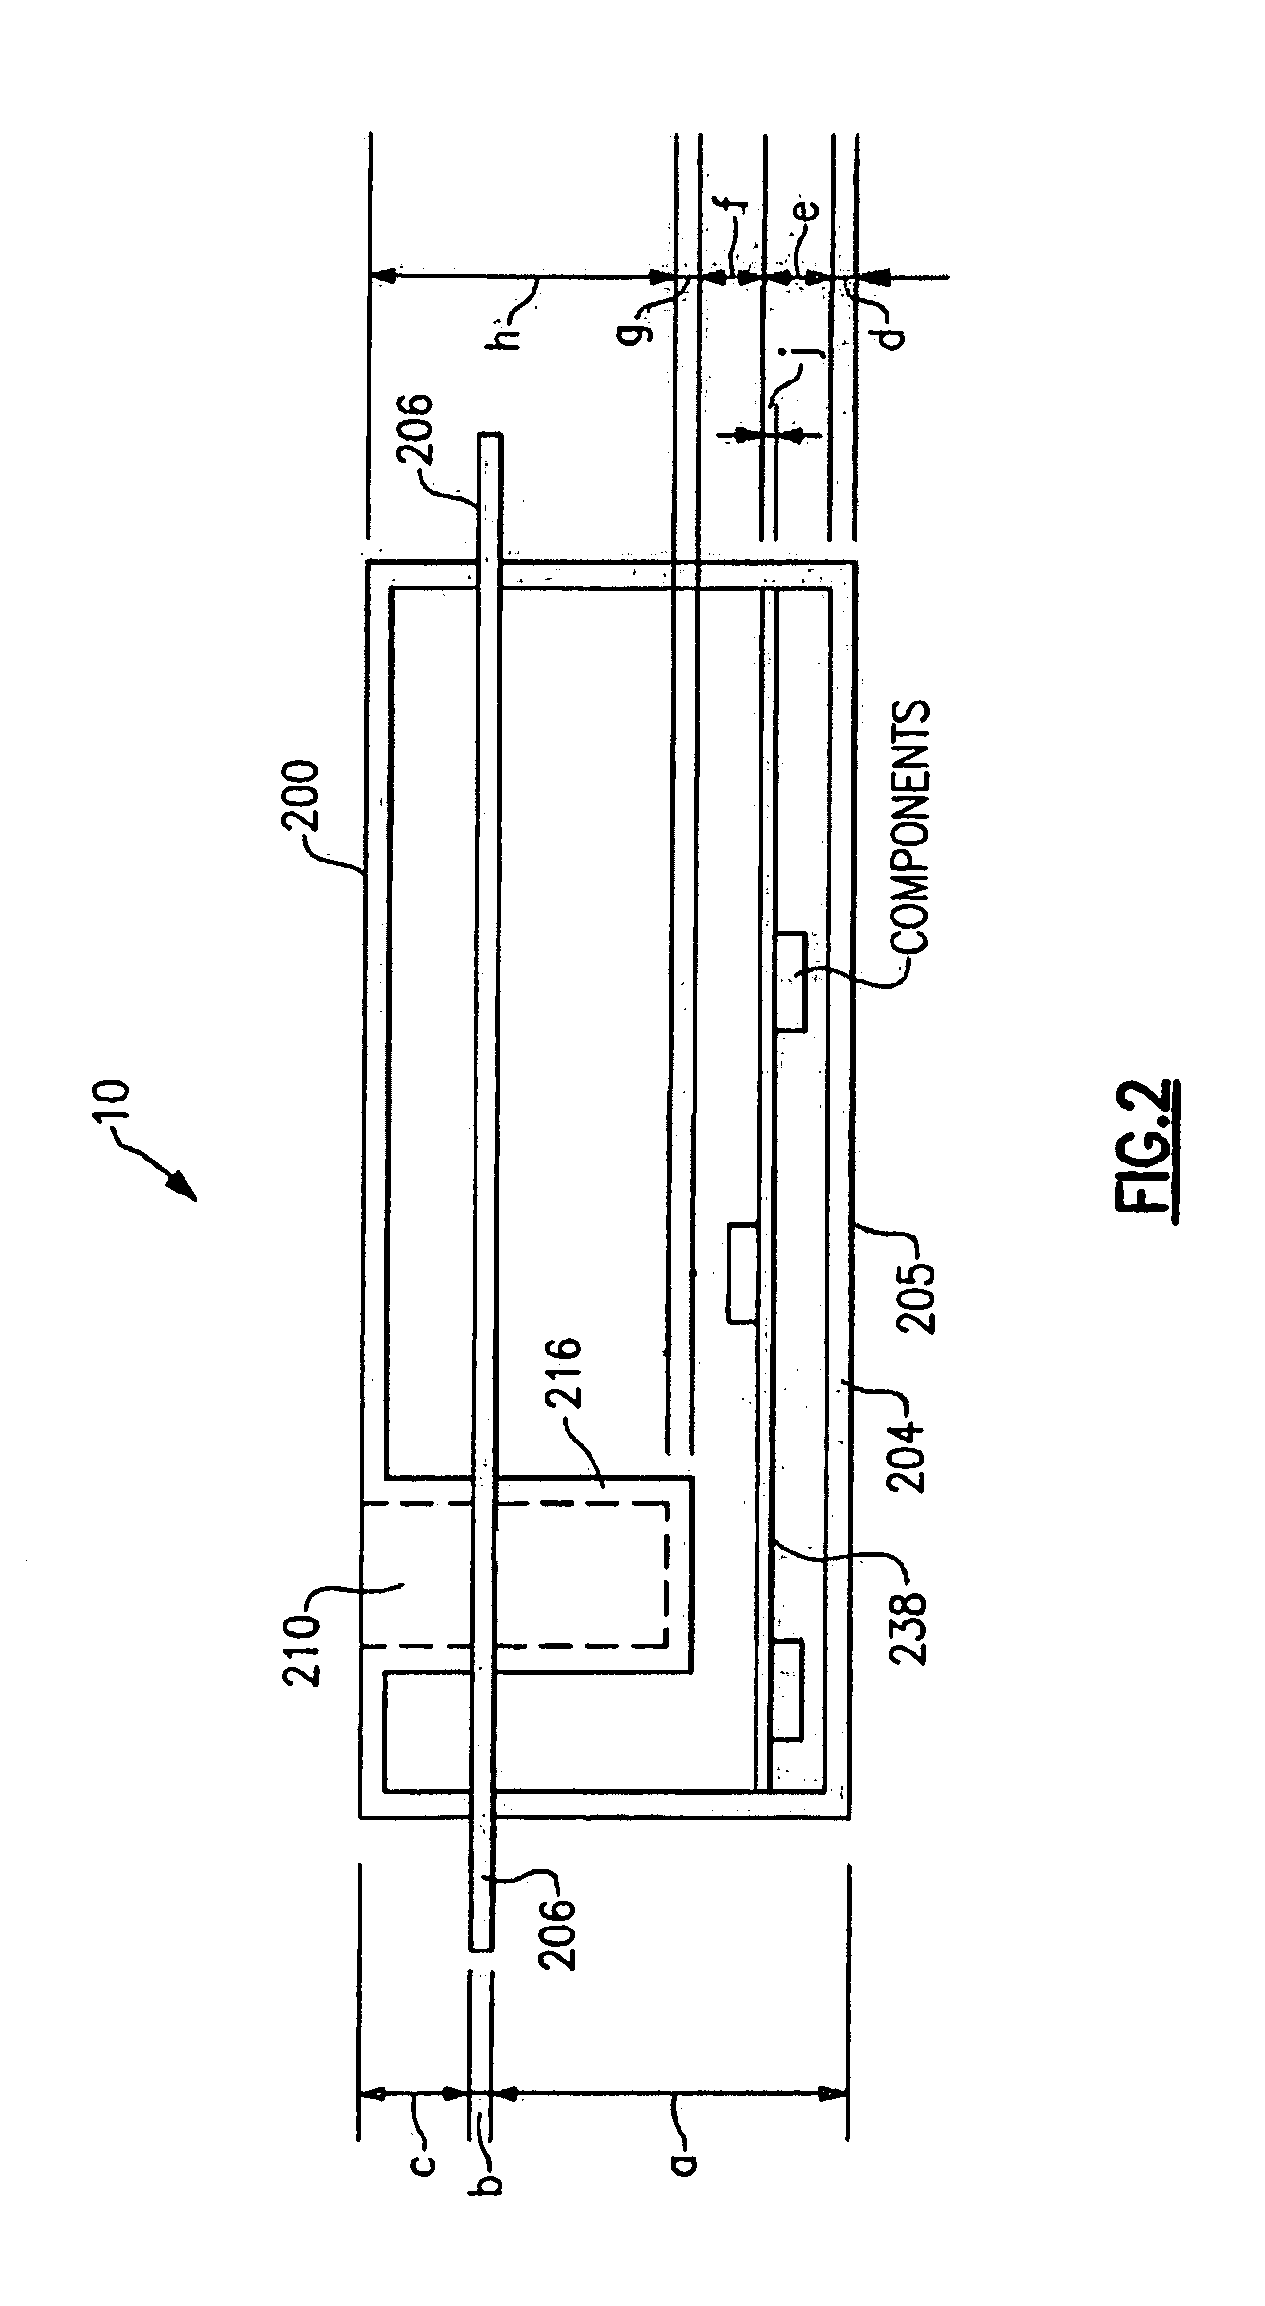 Protective device having a thin construction